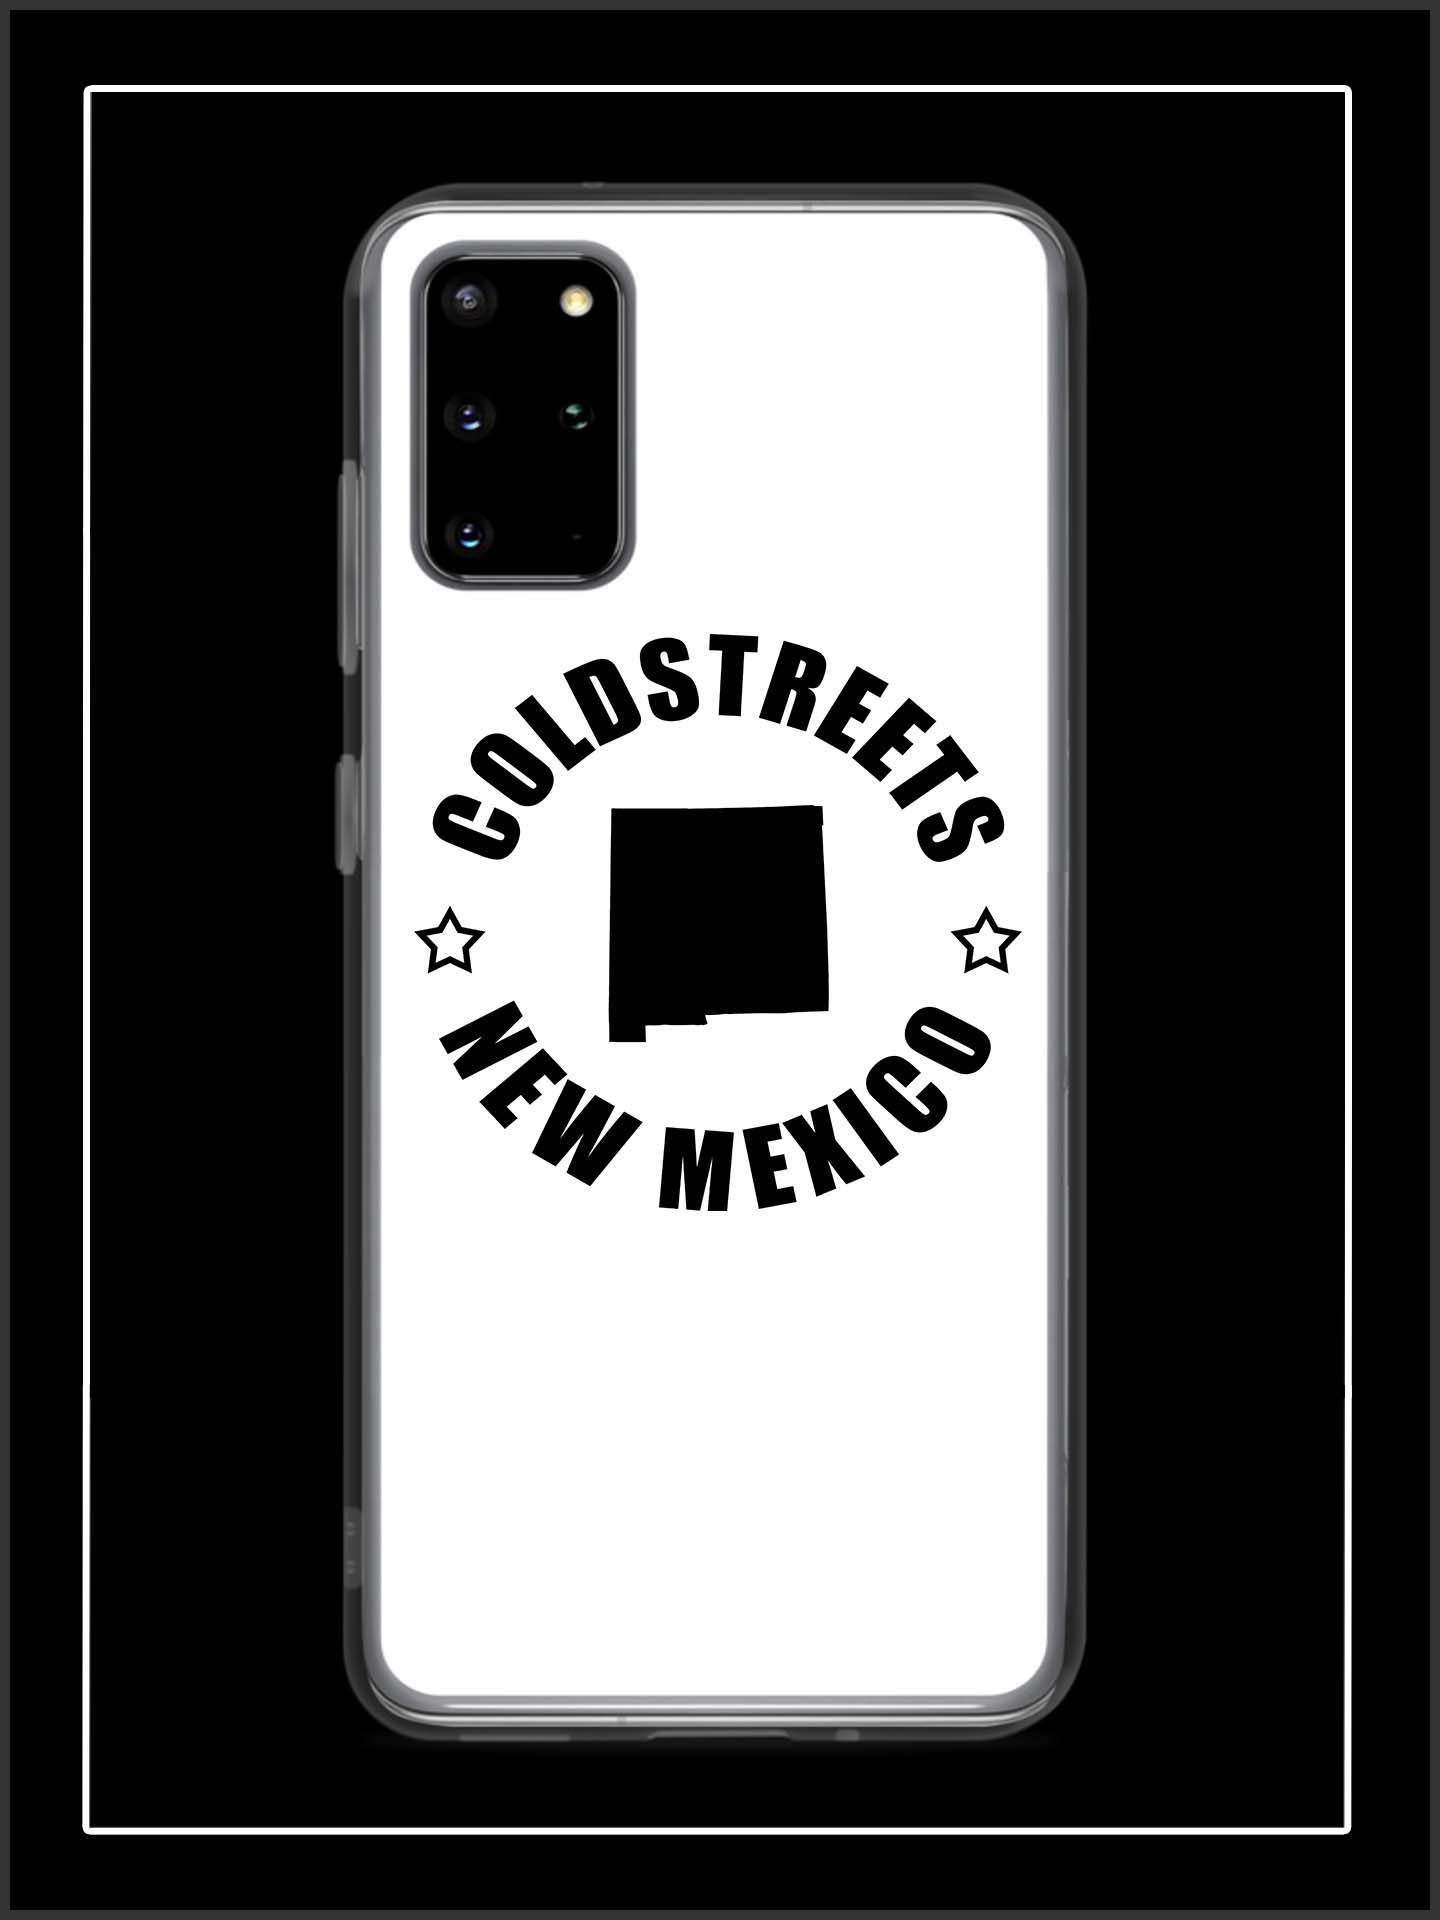 Cold Streets New Mexico Samsung Cases